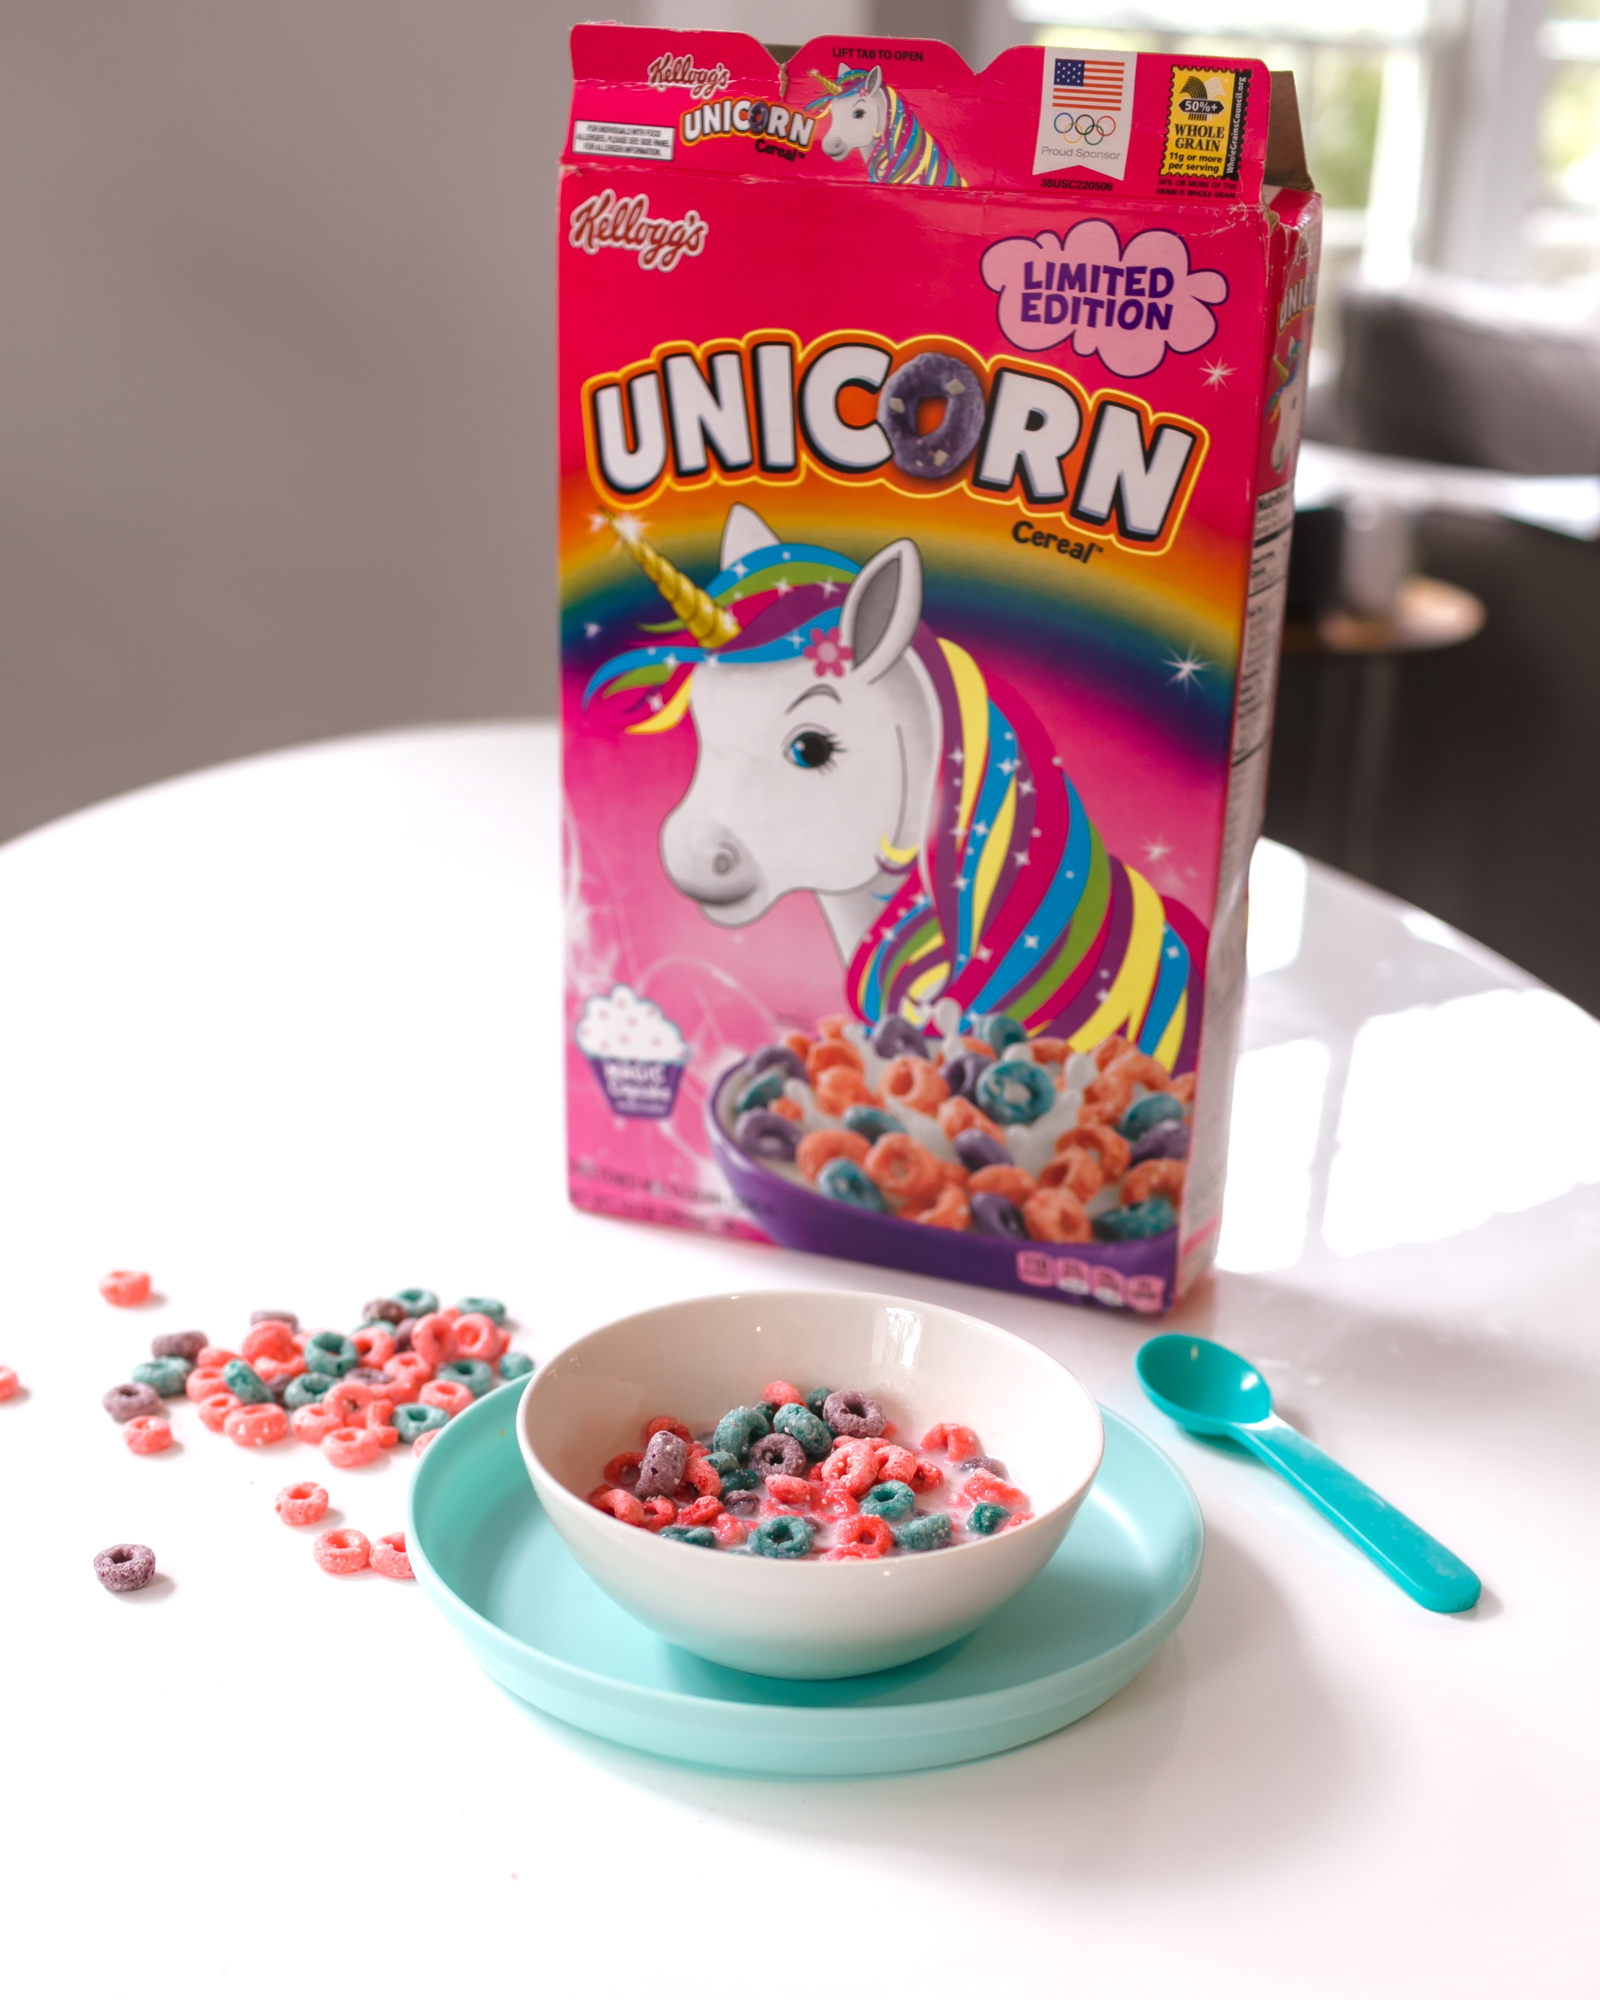 Want to get your hands on a box of limited edition Kellogg's Unicorn cereal? You will have to visit Kellogg's NYC Cafe in Union Square.